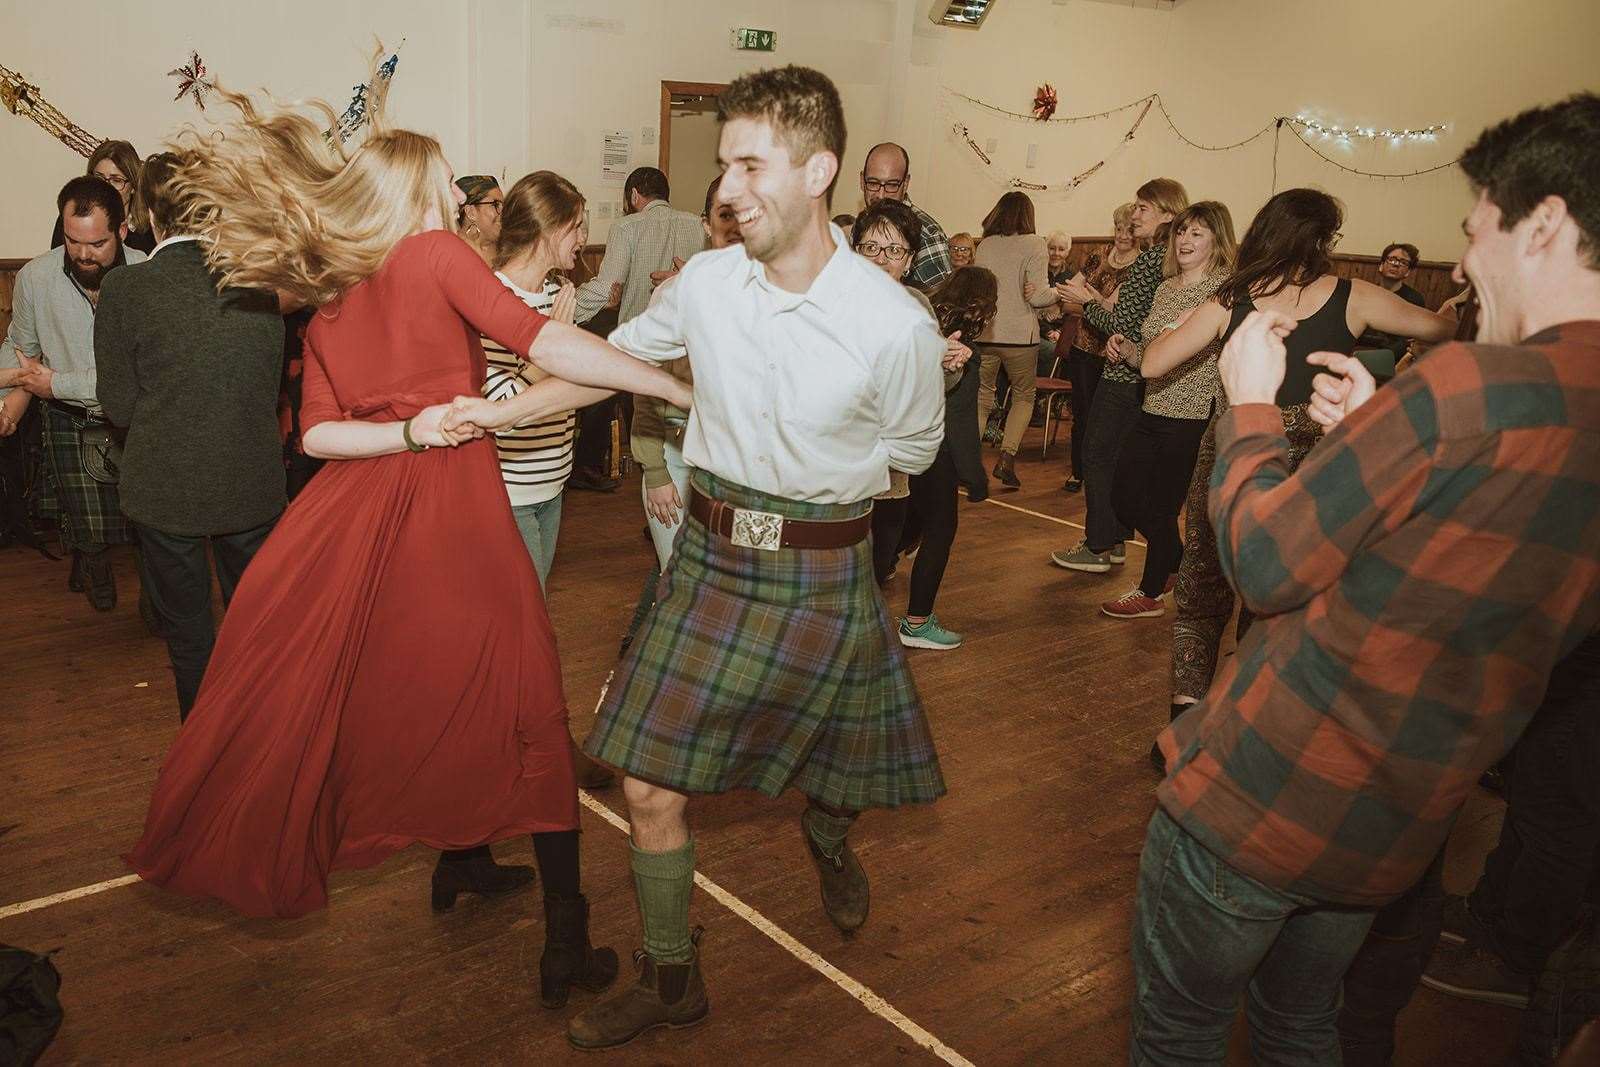 Sutherland Sessions succeeded in their aim of "keeping the party going" by hosting an Auld New Year ceilidh. Picture: Ewen Pryde